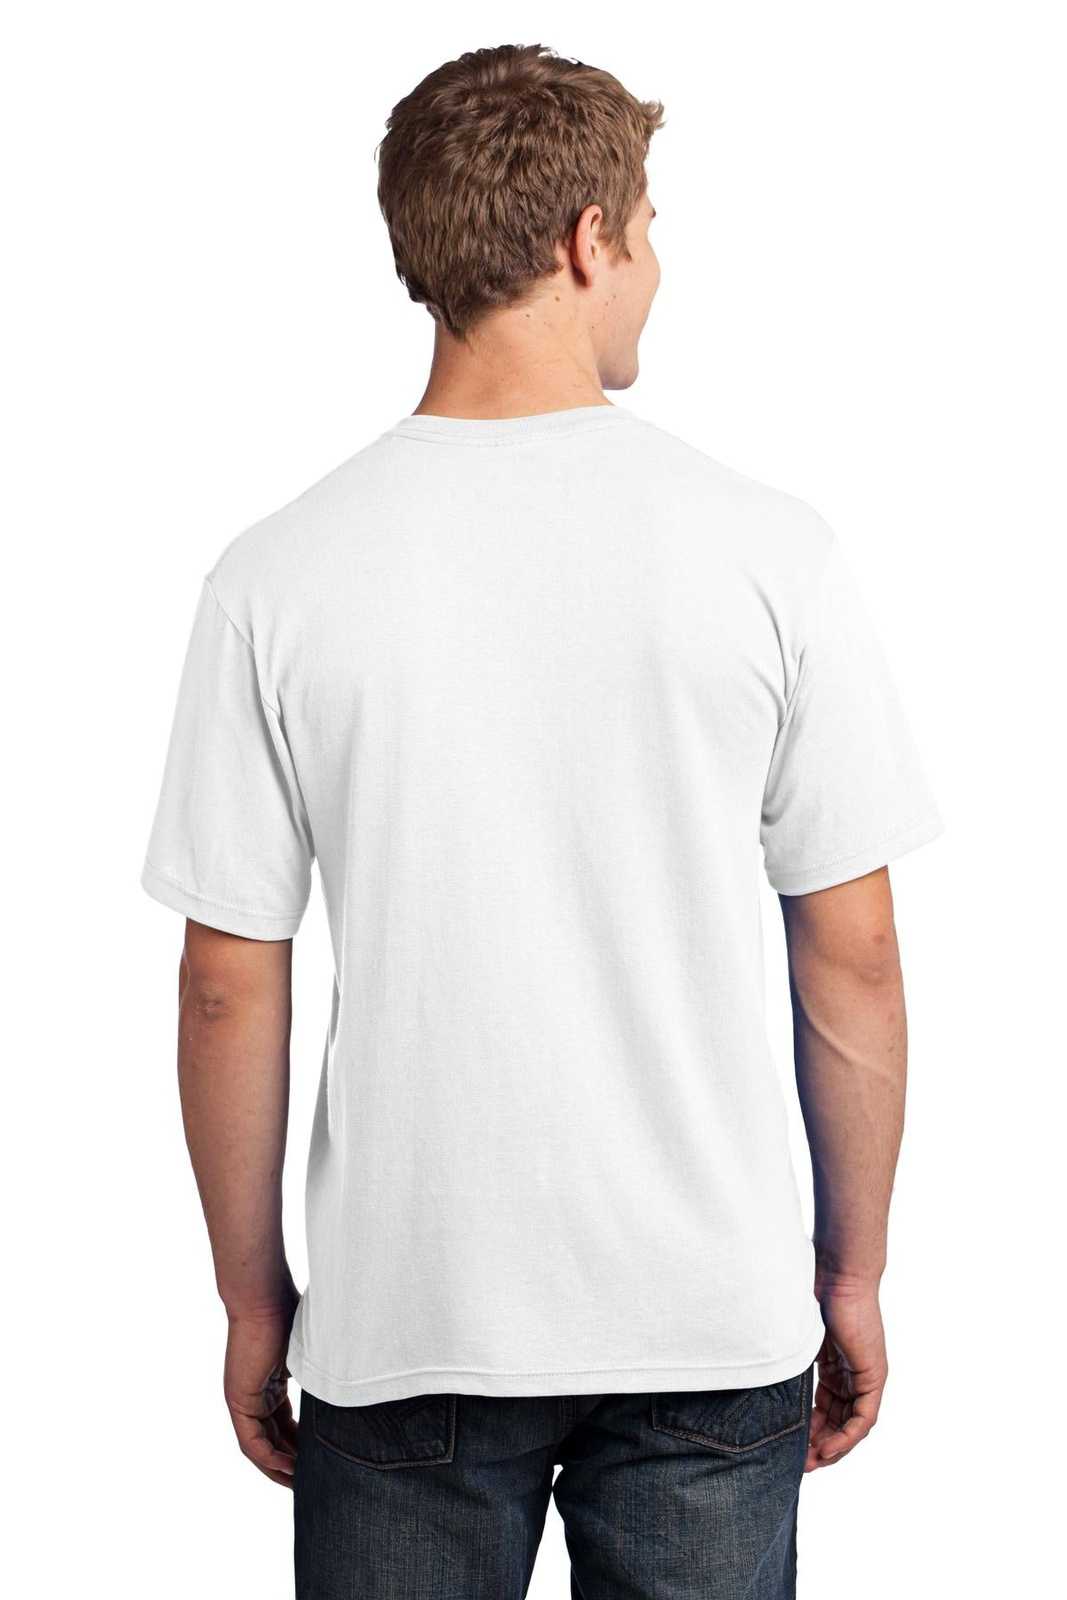 Port & Company USA100 All-American Tee - White - HIT a Double - 1